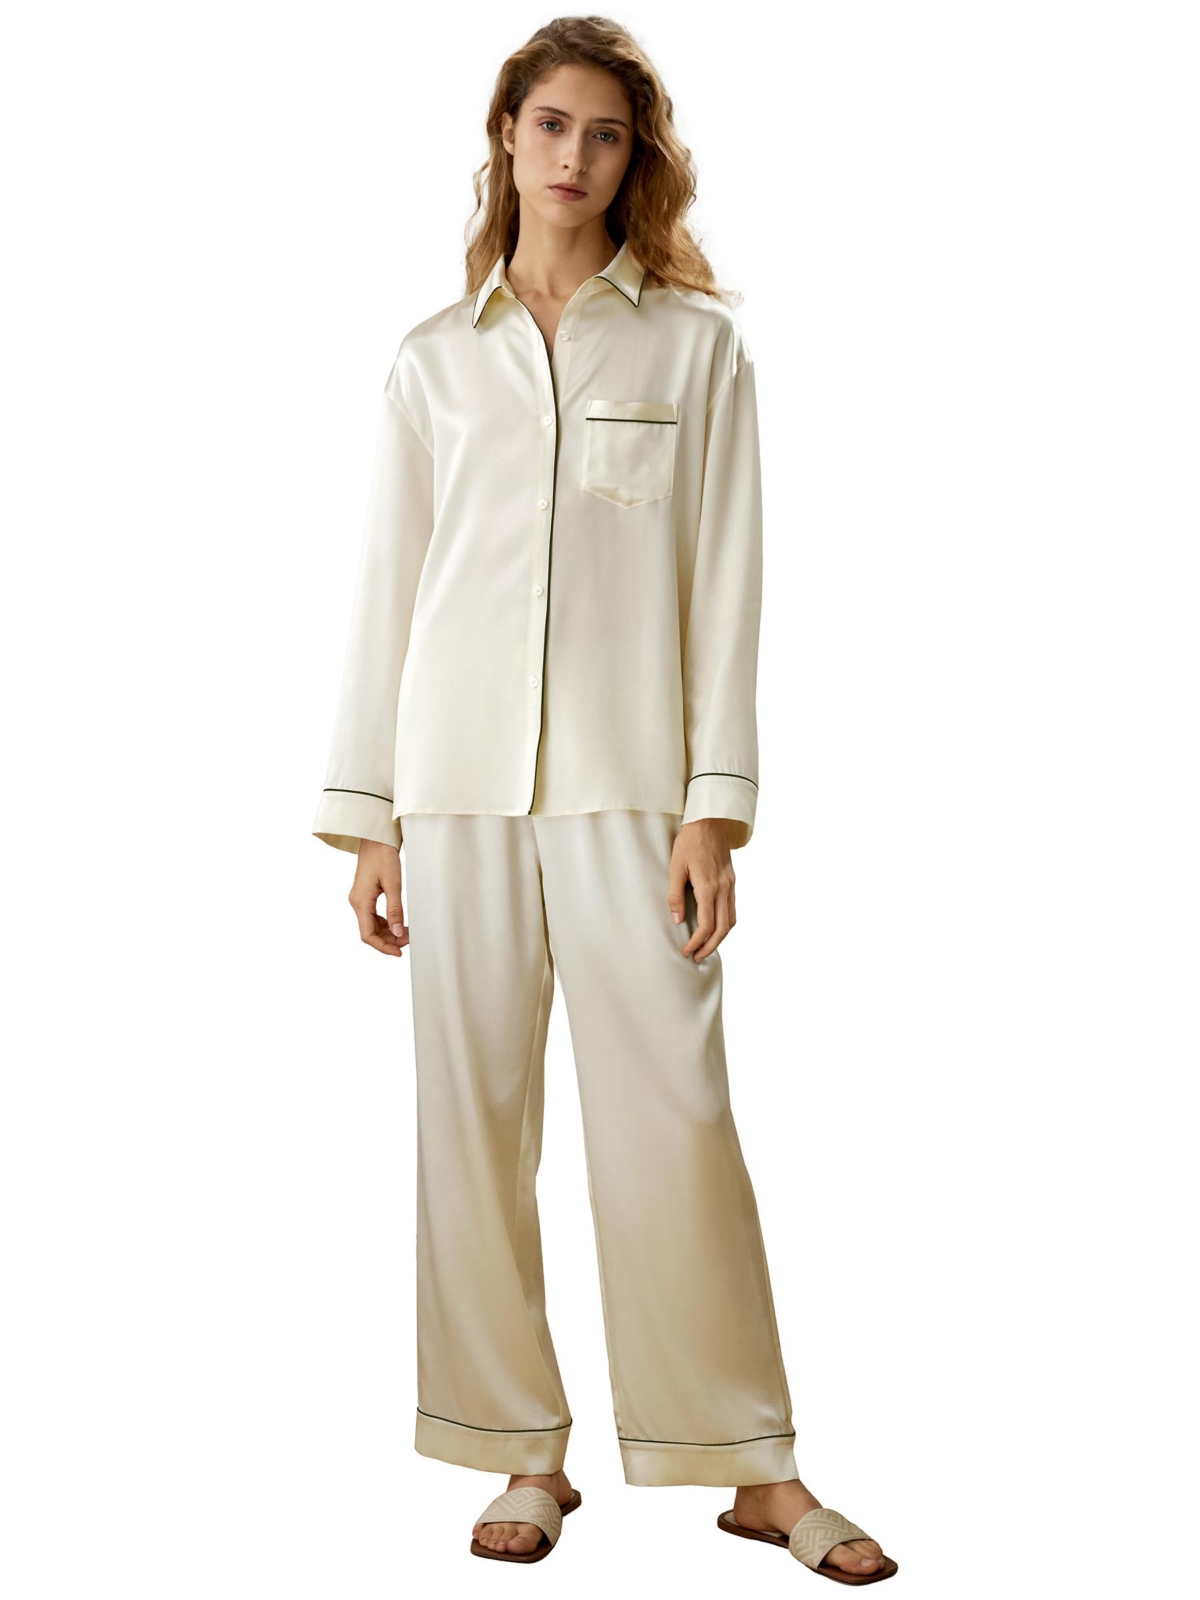 Women's Contrast Piping Button-Up Full Length Pajama Set for Women - Lily white